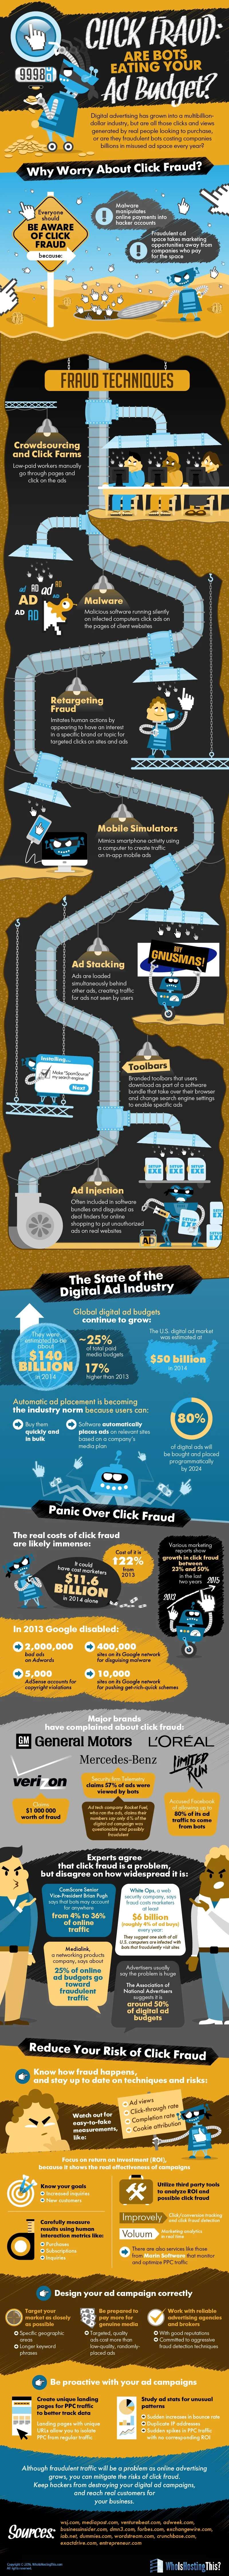 Click Fraud: Are Bots Stealing Your Ad Dollars? - #infographic